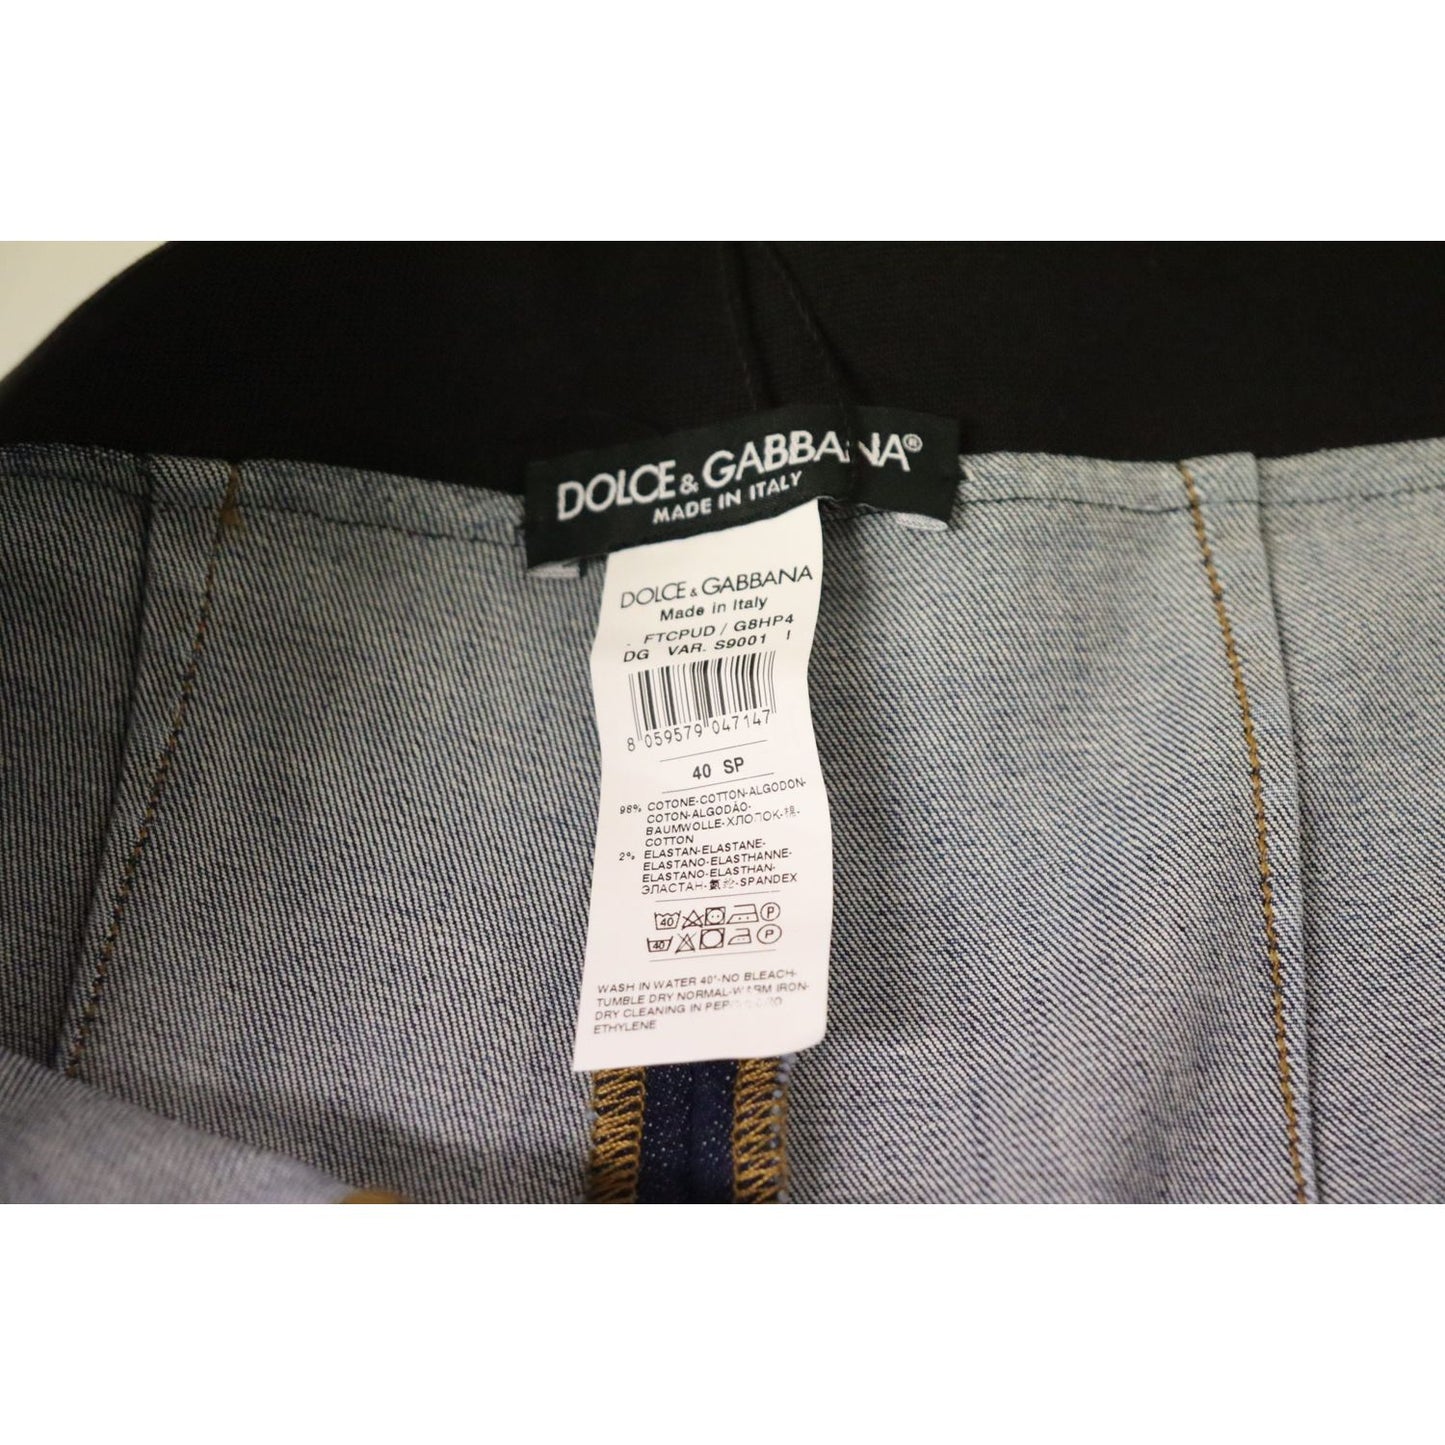 Dolce & GabbanaHigh Waist Skinny Denim The latest in style, these skinny jeans take it up a notch with a flattering high waist. Made of 98% cotton and 2% elastane, they offer a snug yet comfortable stretch fit. Country of origin: IT, you'll be donning a p